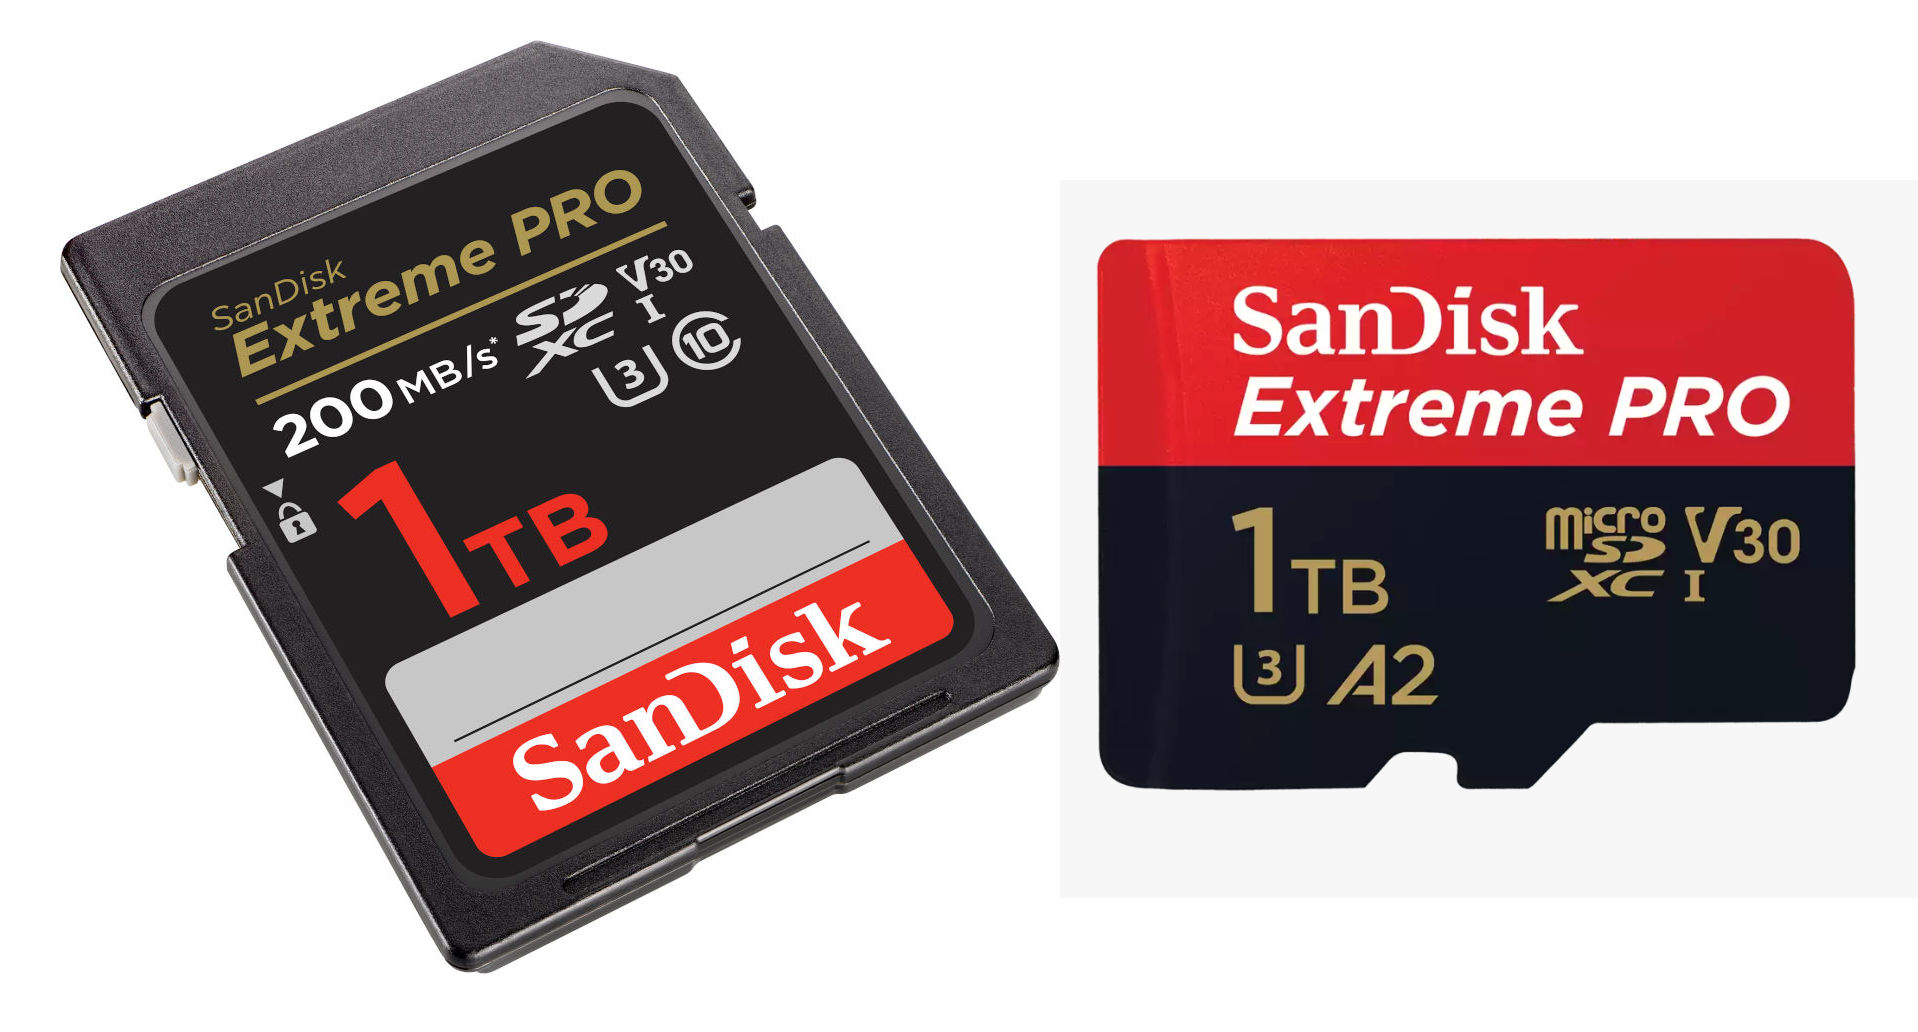 New SanDisk Extreme Pro microSD and SD UHS-I memory cards: The fastest in the world right now